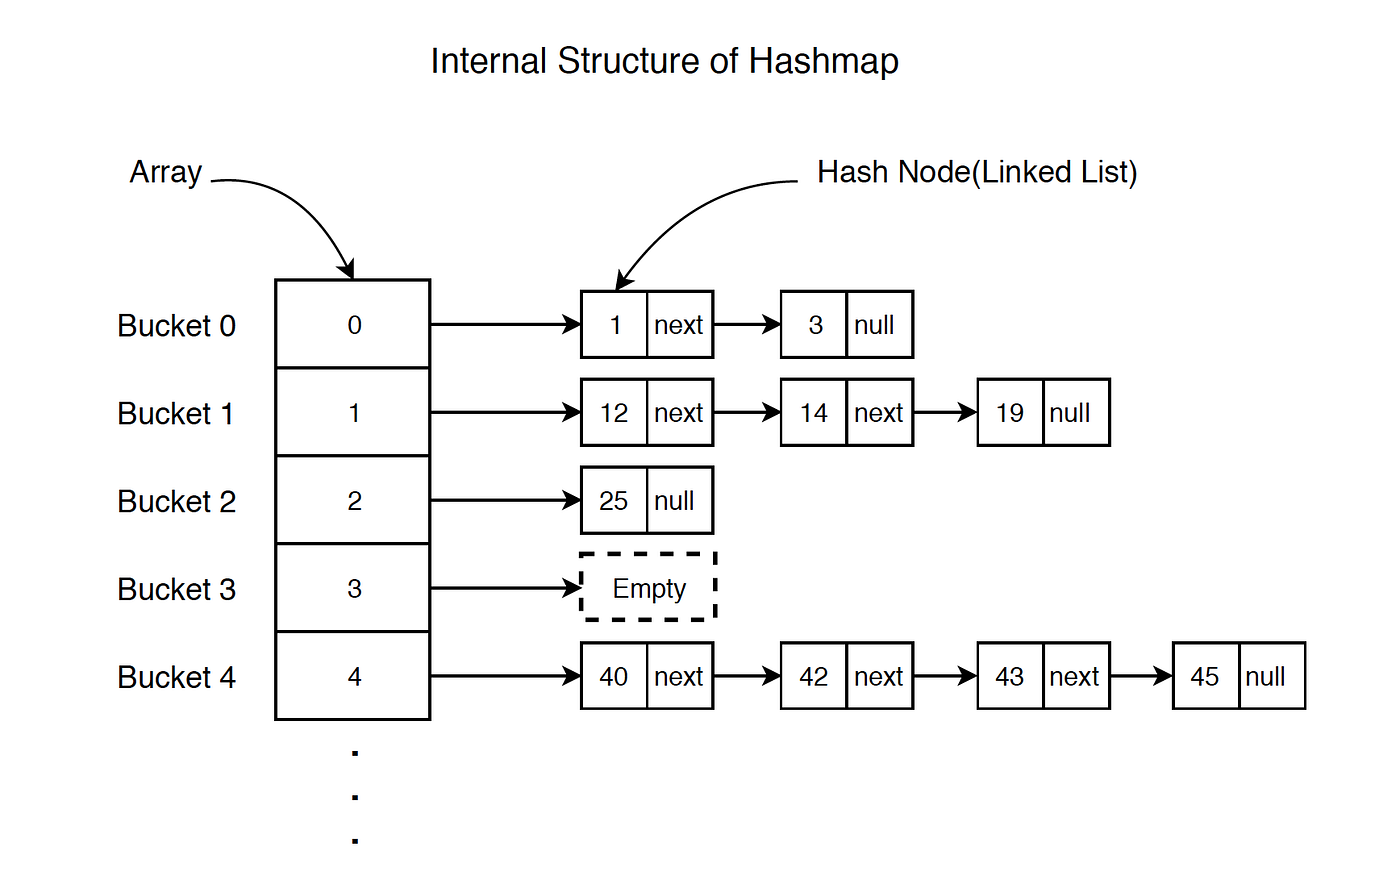 Internal structure of HashMap. Keys are divided into buckets. Each bucket points to a Linked List.